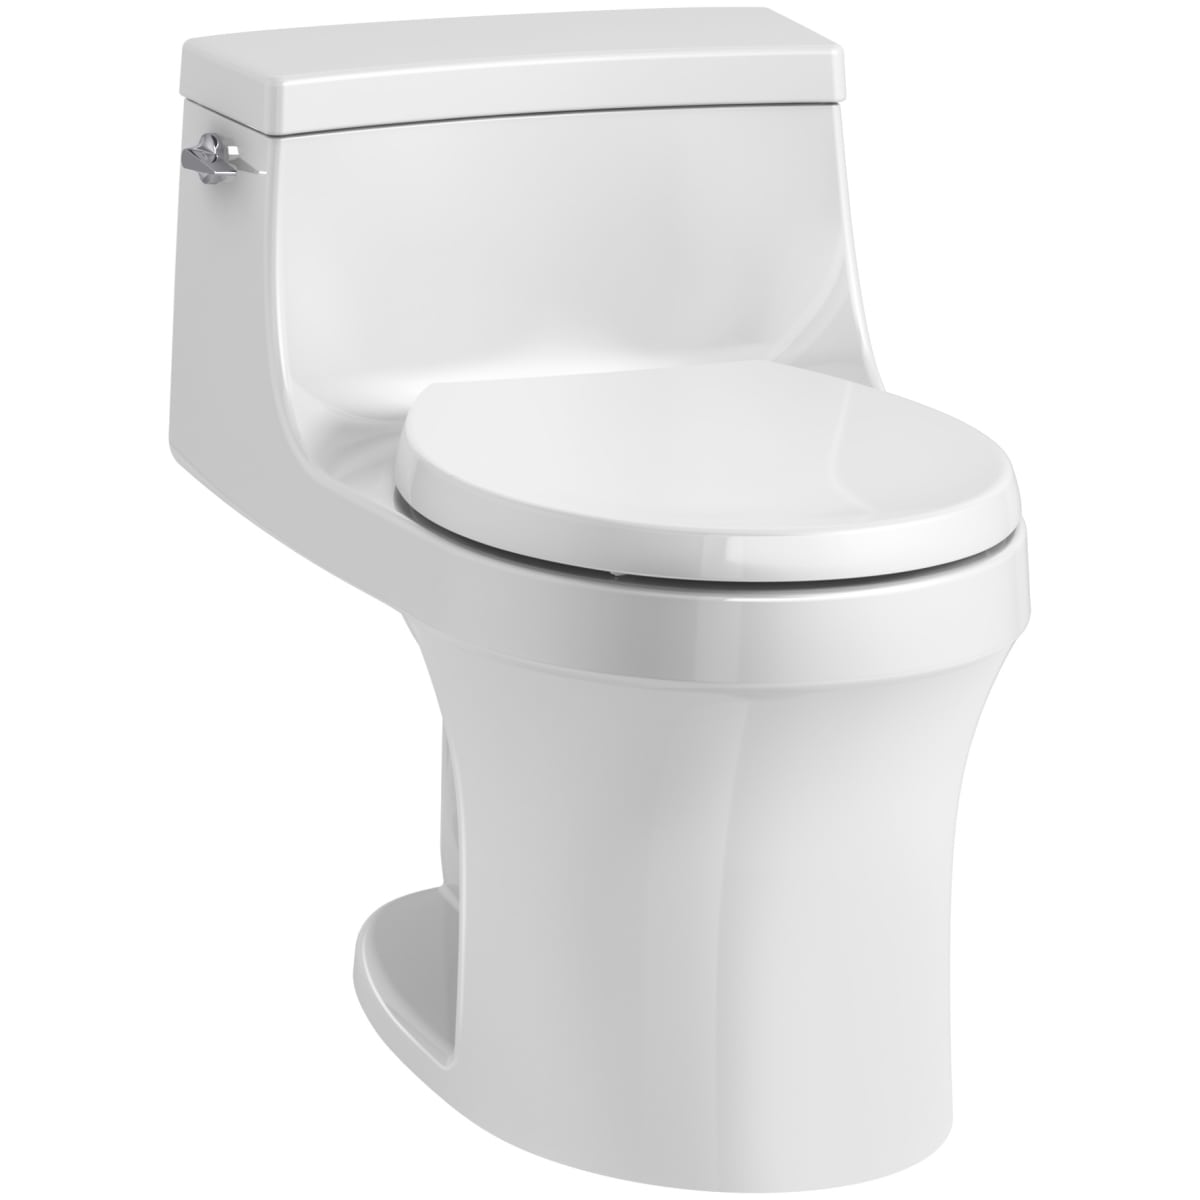 Kohler K 4007 0 White San Souci 1 28 Gpf One Piece Round Front Toilet With Aquapiston Technology Seat Included Faucetdirect Com